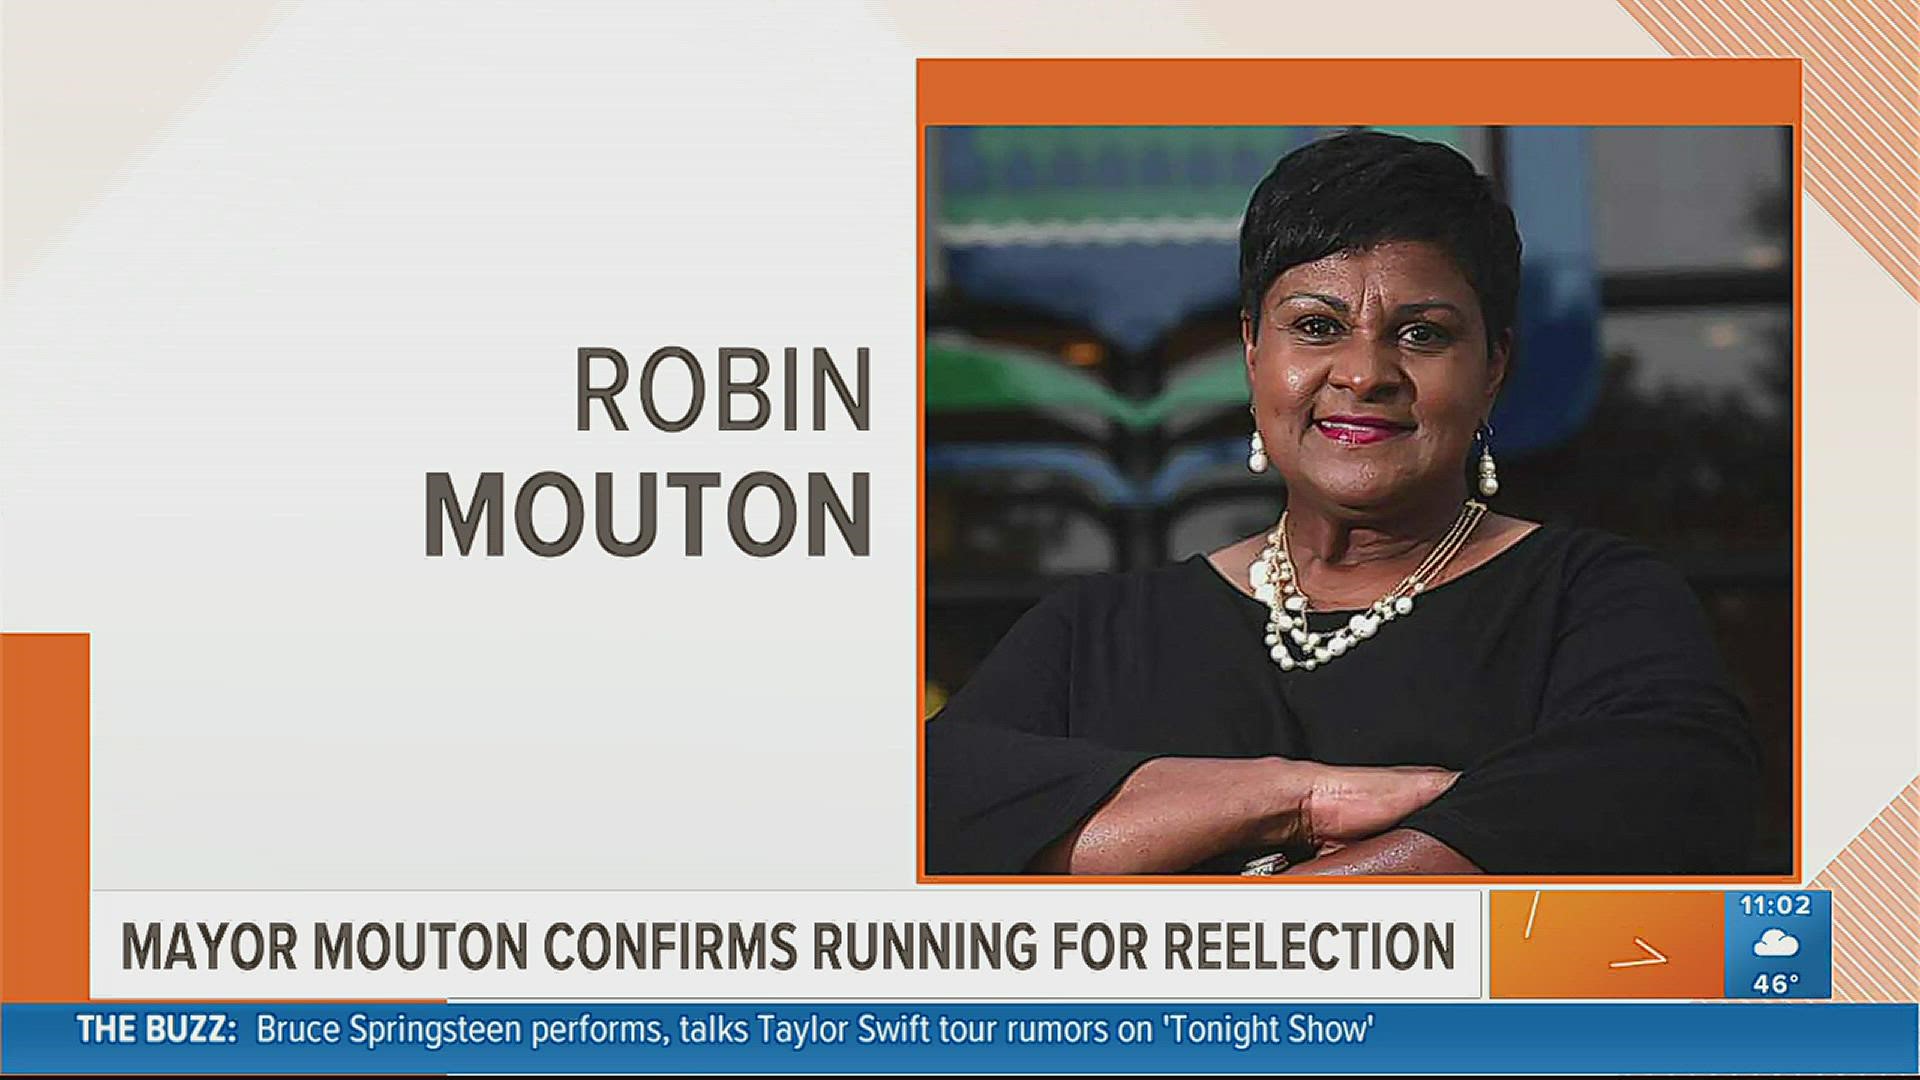 Beaumont Mayor Robin Mouton has announced that she plans to seek re-election in 2023.